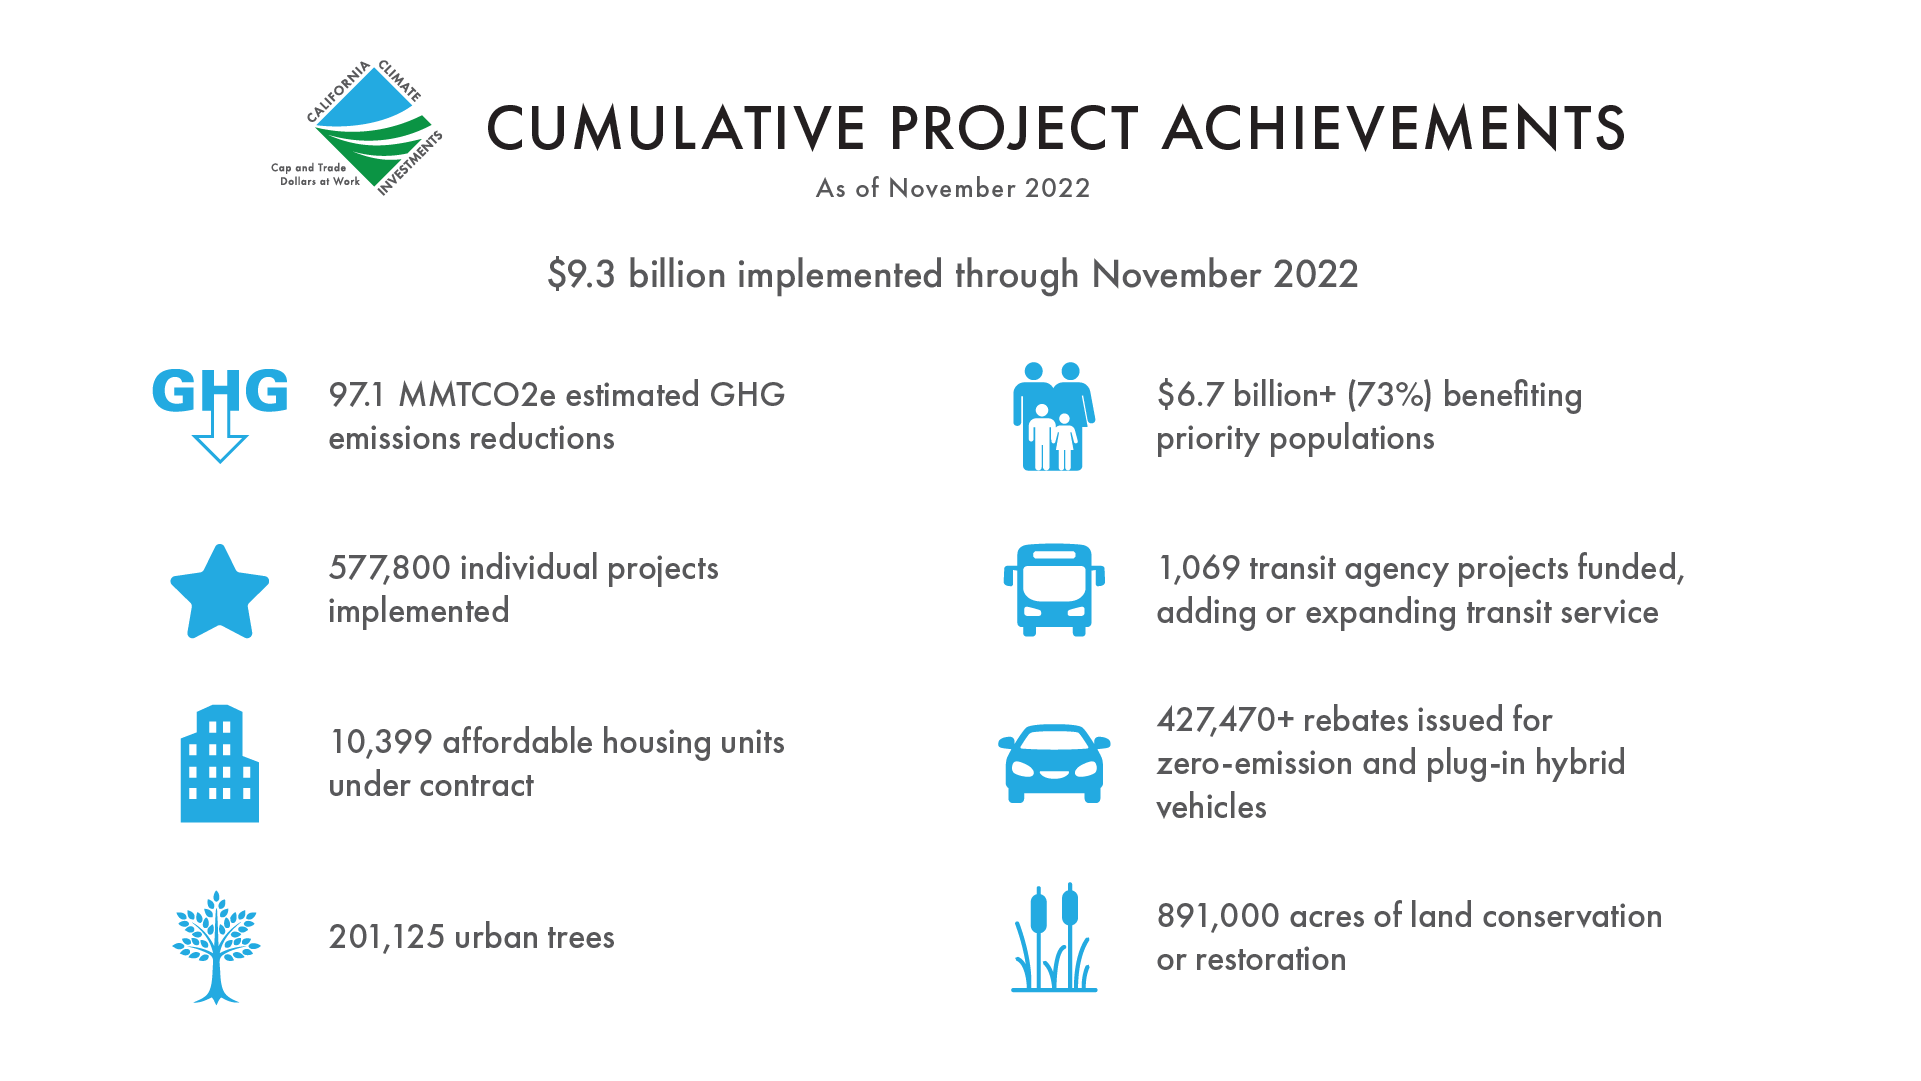 Cumulative Project Achievements - As of November 2022 $9.3 billion implemented through November 2022 97.1 MMTCO2e estimated GHG emissions reductions 577,800 individual projects implemented 10,399 affordable housing units under contract 201,125 urban trees $6.7 billion+ (73%) benefiting priority populations 1,069 transit agency projects funded, adding or expanding transit service 427,470+ rebates issued for zero-emission and plug-in hybrid vehicles 891,000 acres of land conservation or restoration